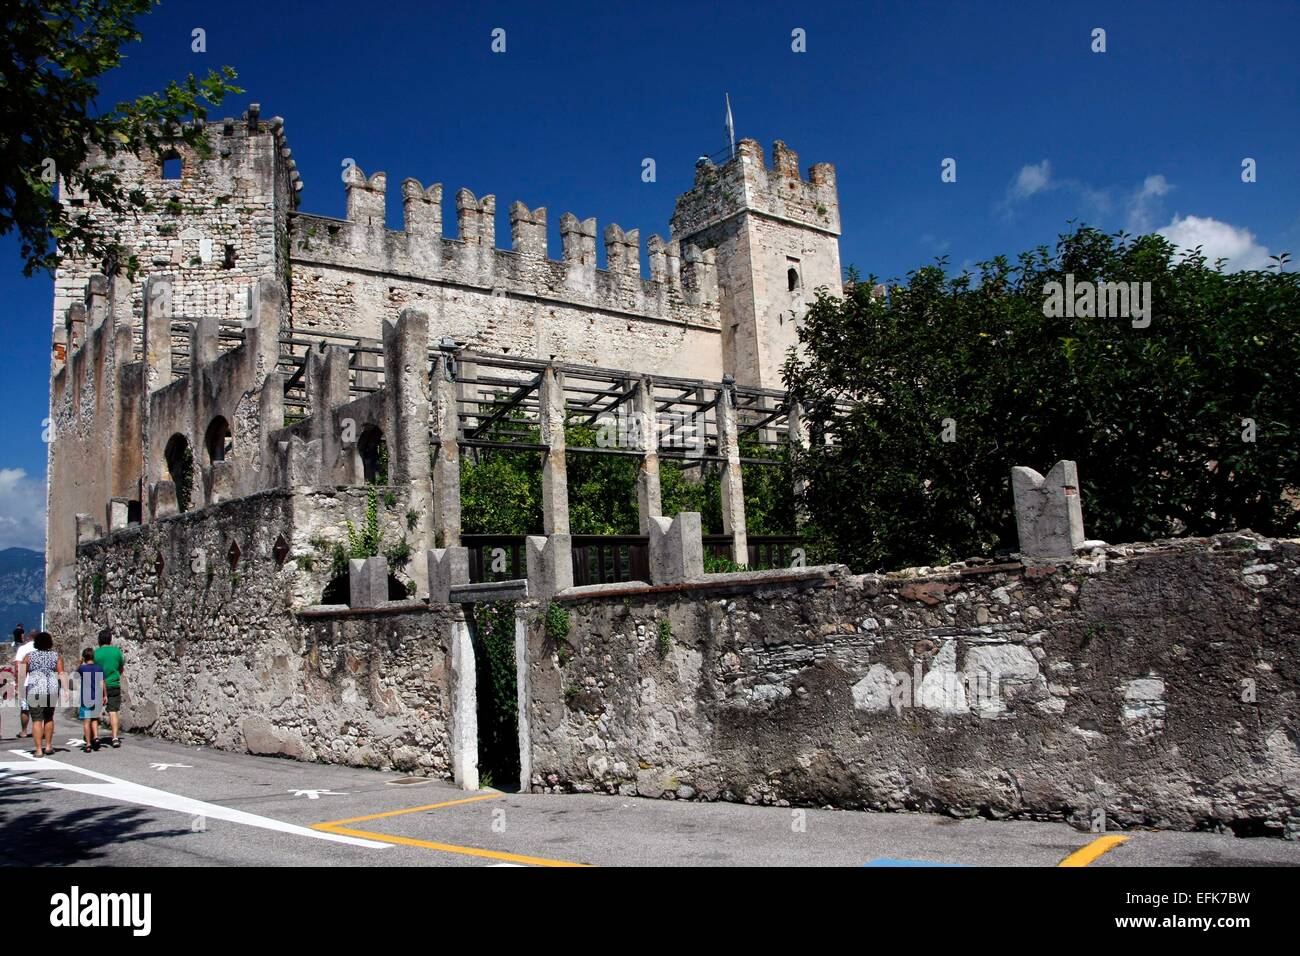 Scaliger Castle in Torri del Benaco was built in 1383 to protect the harbor. Torri del Benaco is a town on the eastern shore of Lake Garda. Photo: Klaus Nowottnick Date: August 27, 2014 Stock Photo